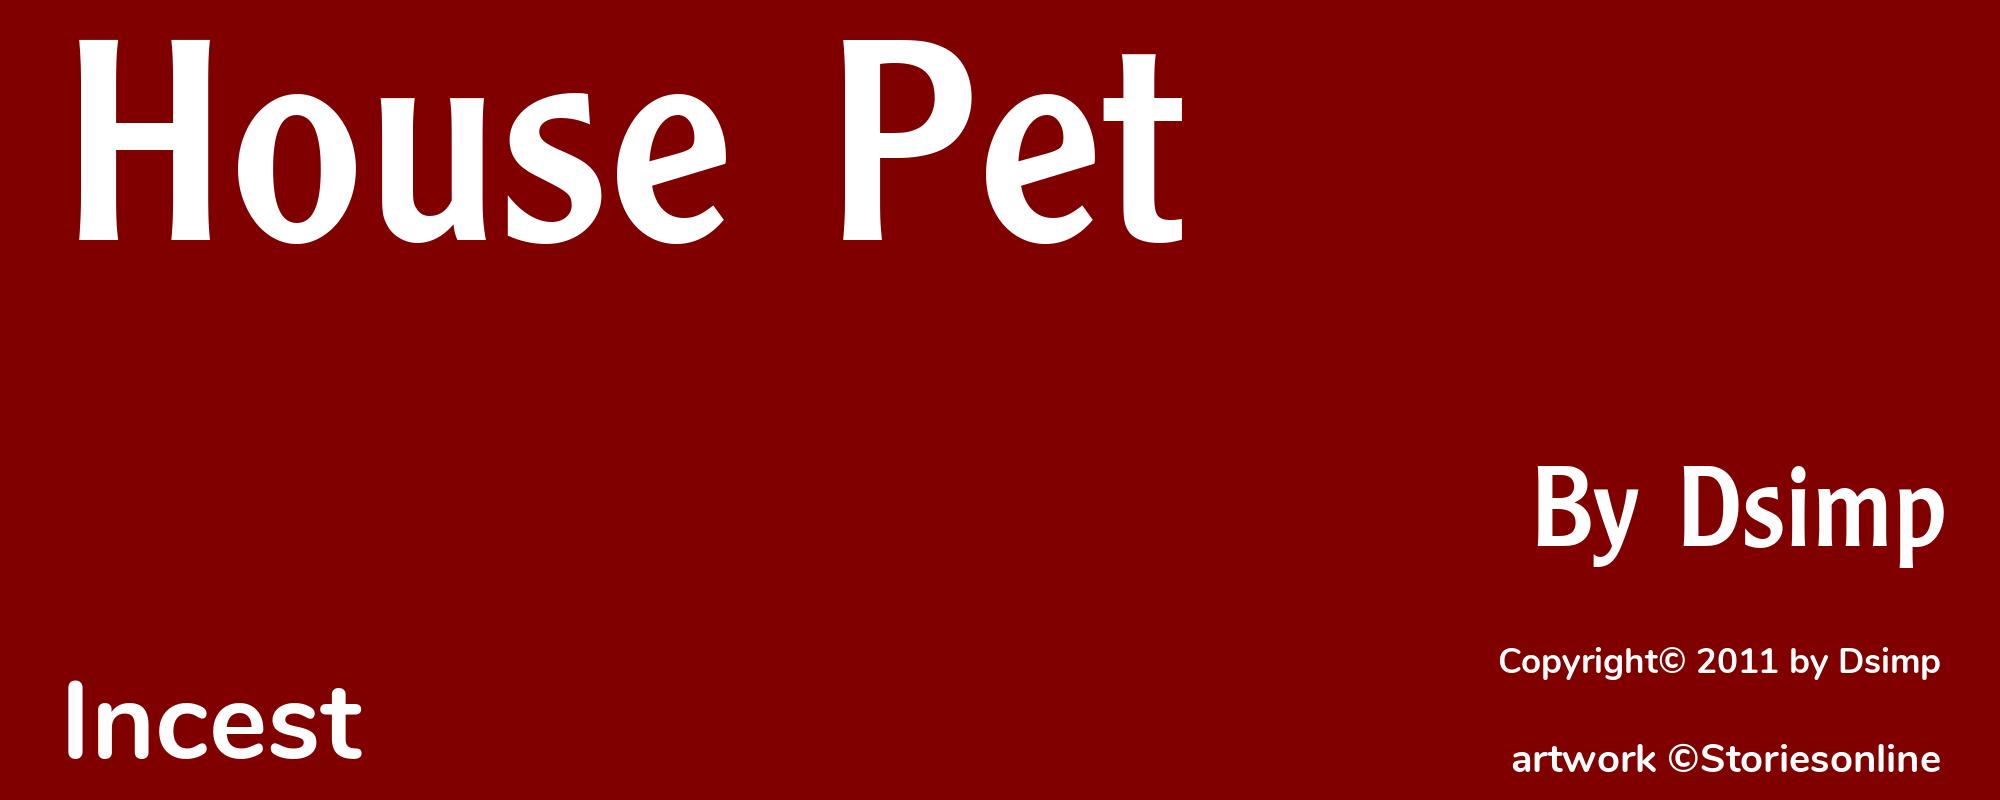 House Pet - Cover